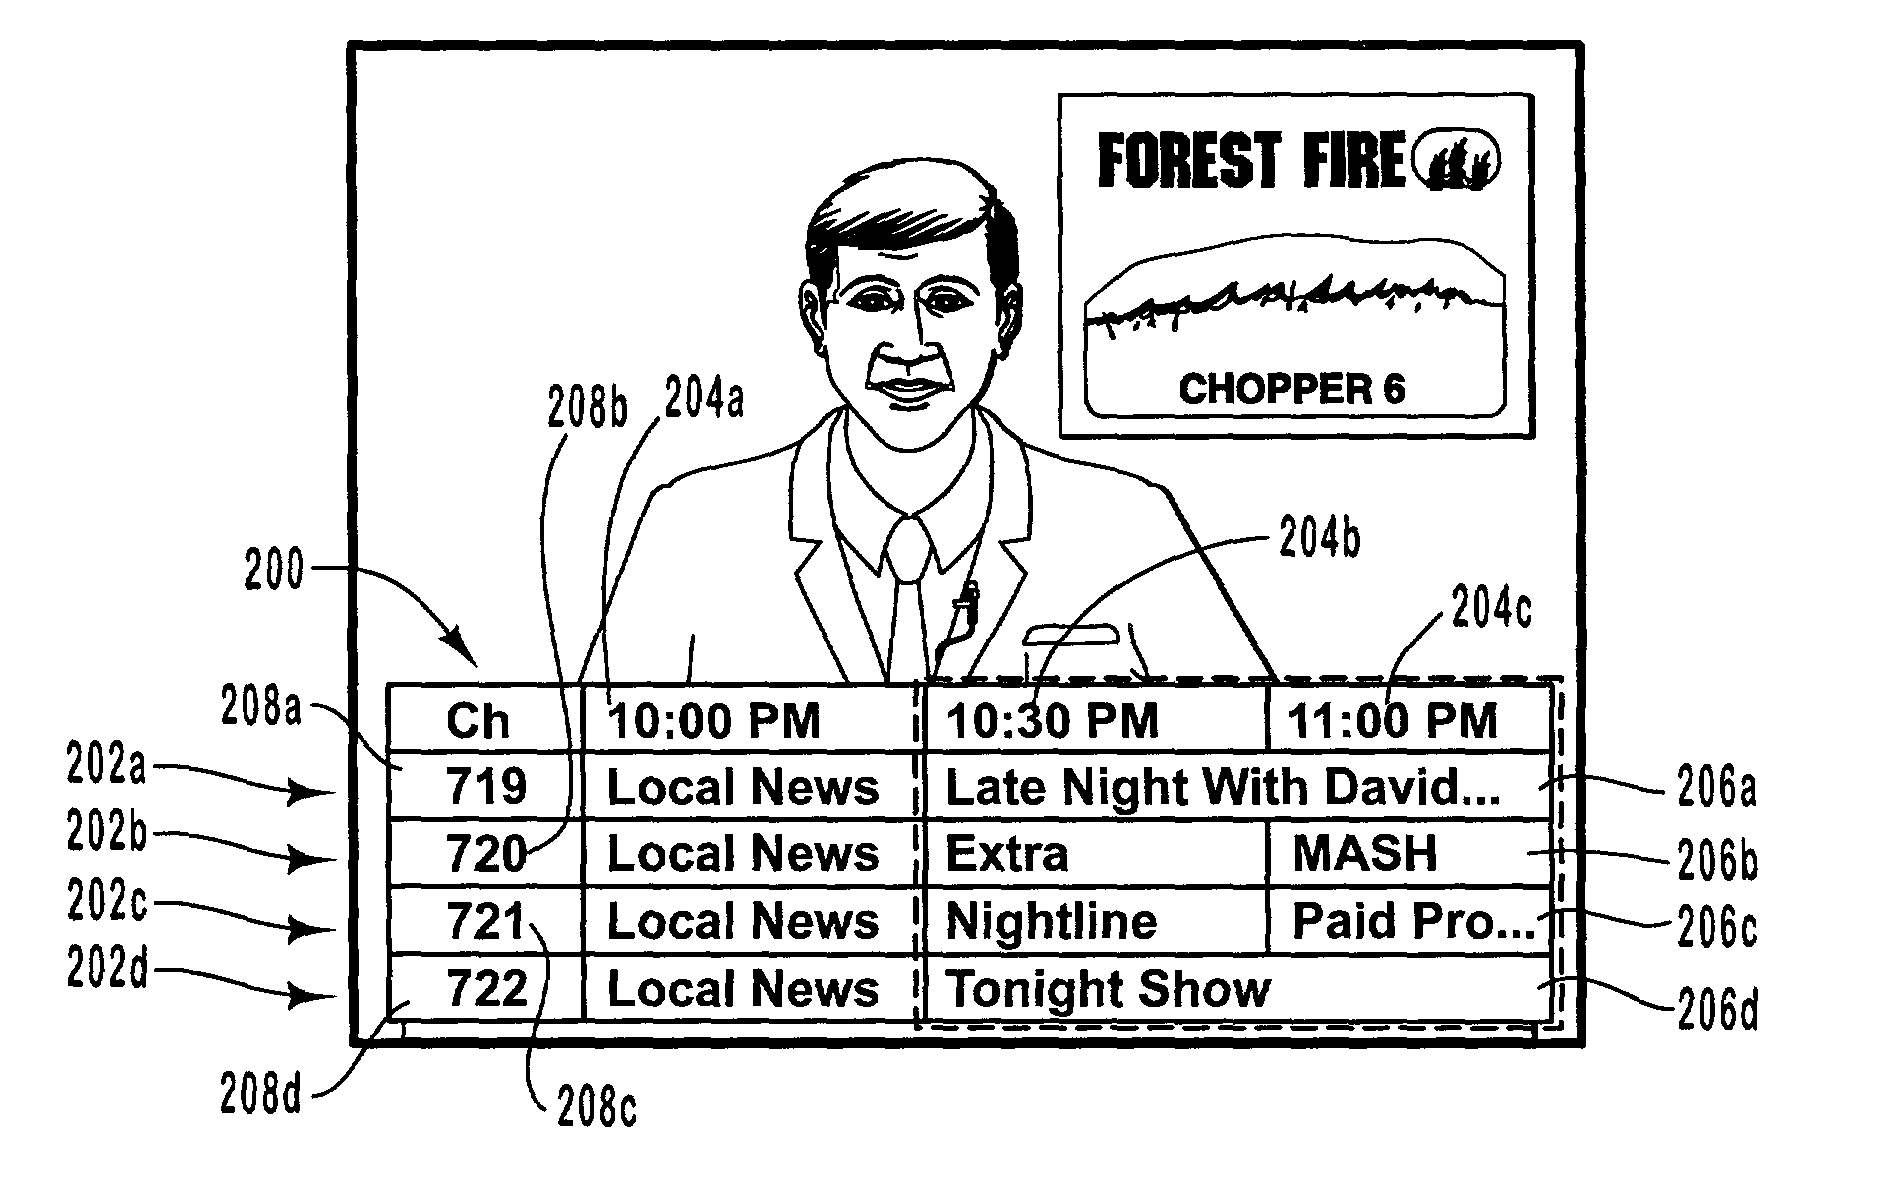 Electronic program guide displayed simultaneously with television programming